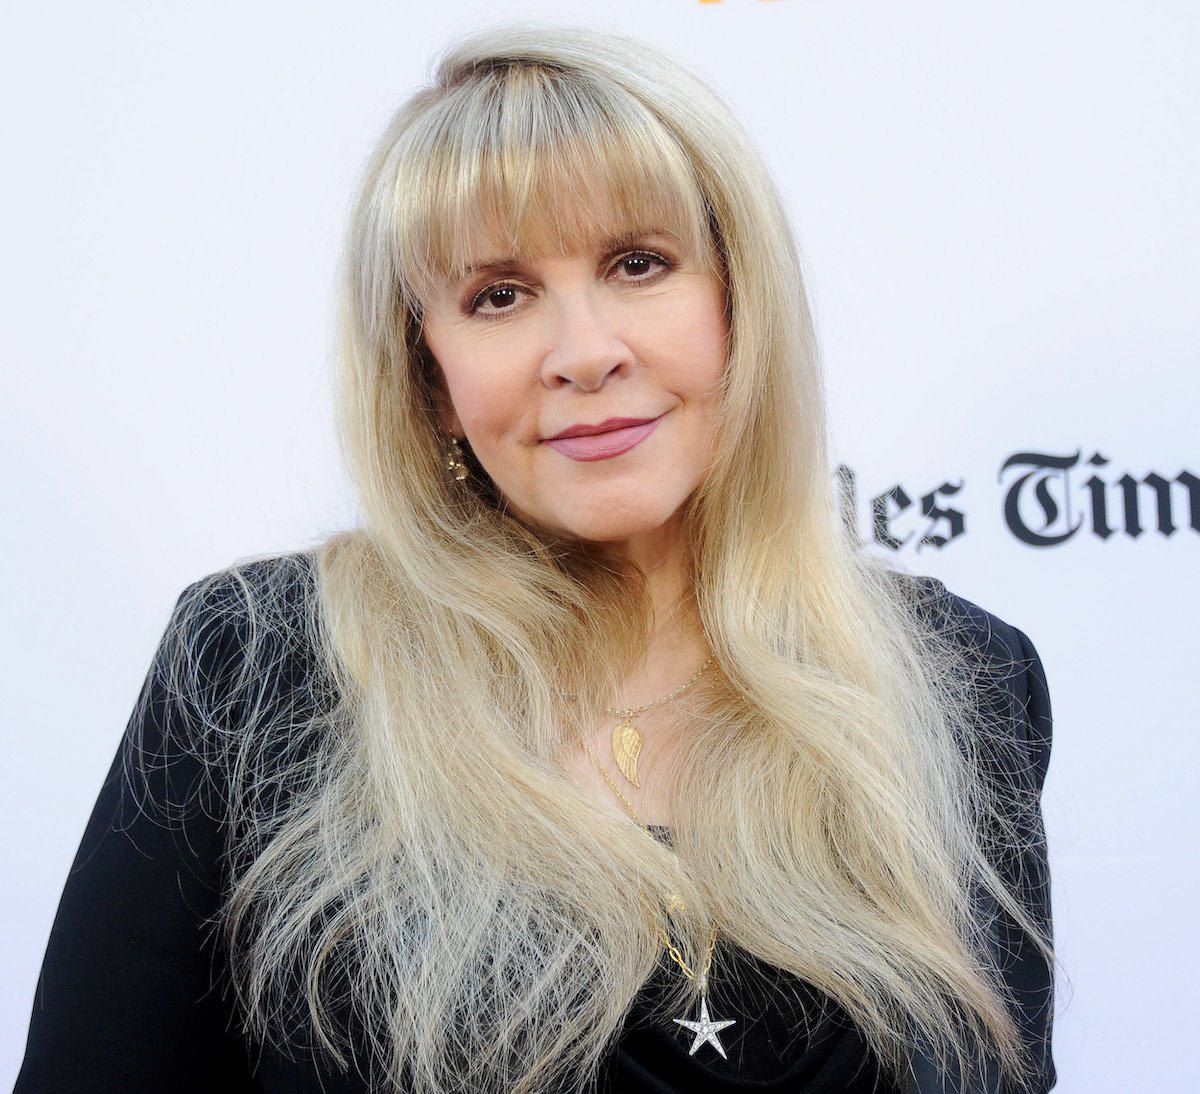 Stevie Nicks, who dated multiple members of Fleetwood Mac and the Eagles.